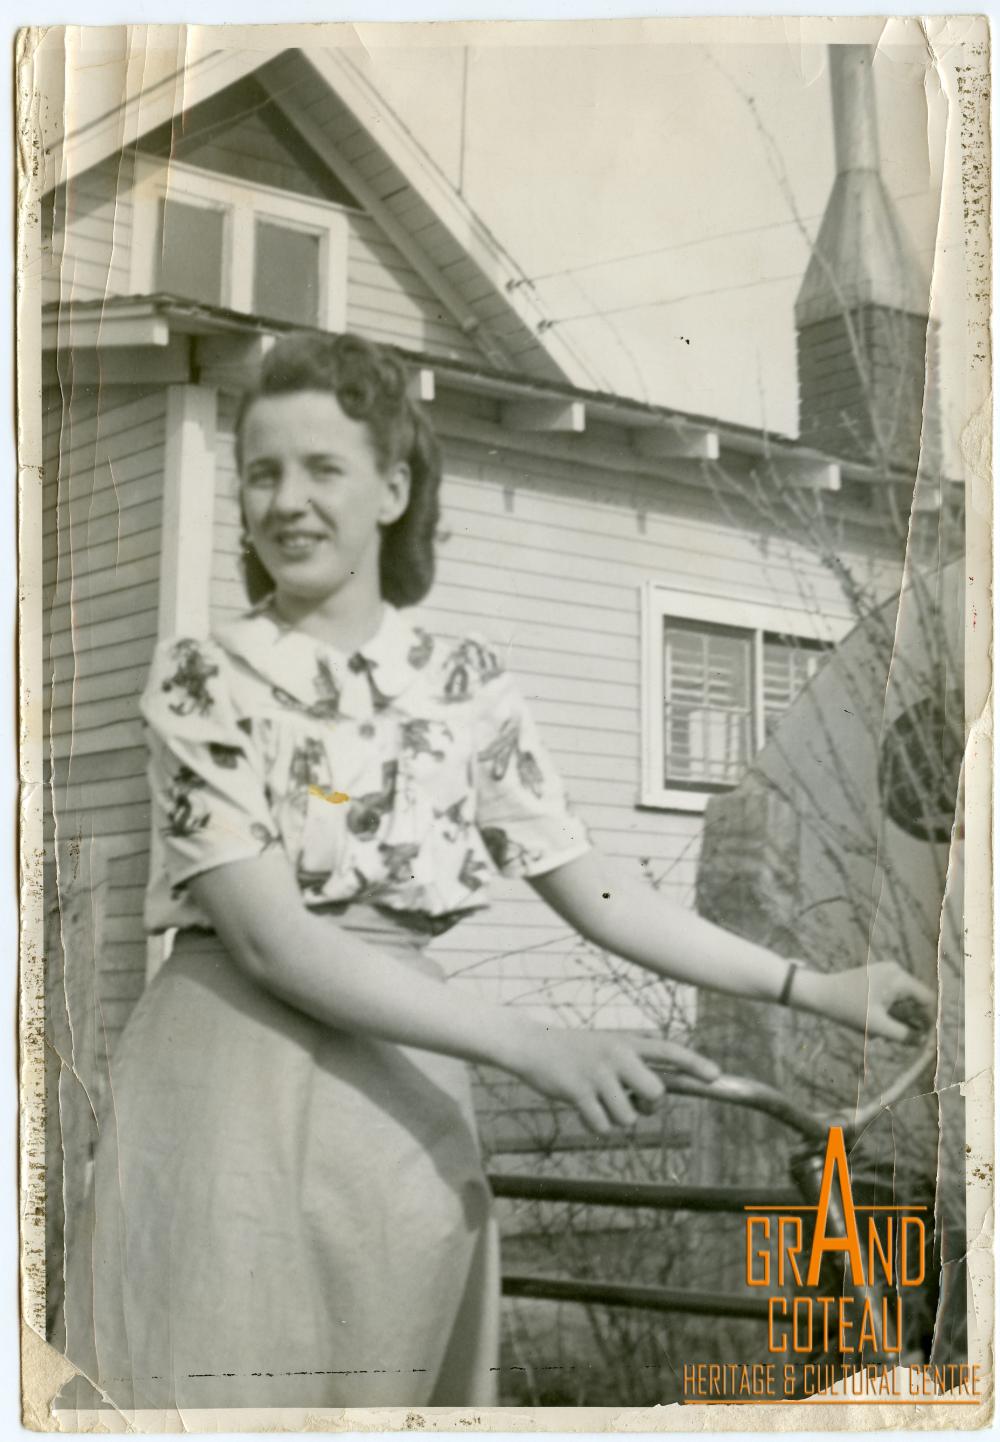 Photographic Print, unidentified woman posing with bicycle in front of house